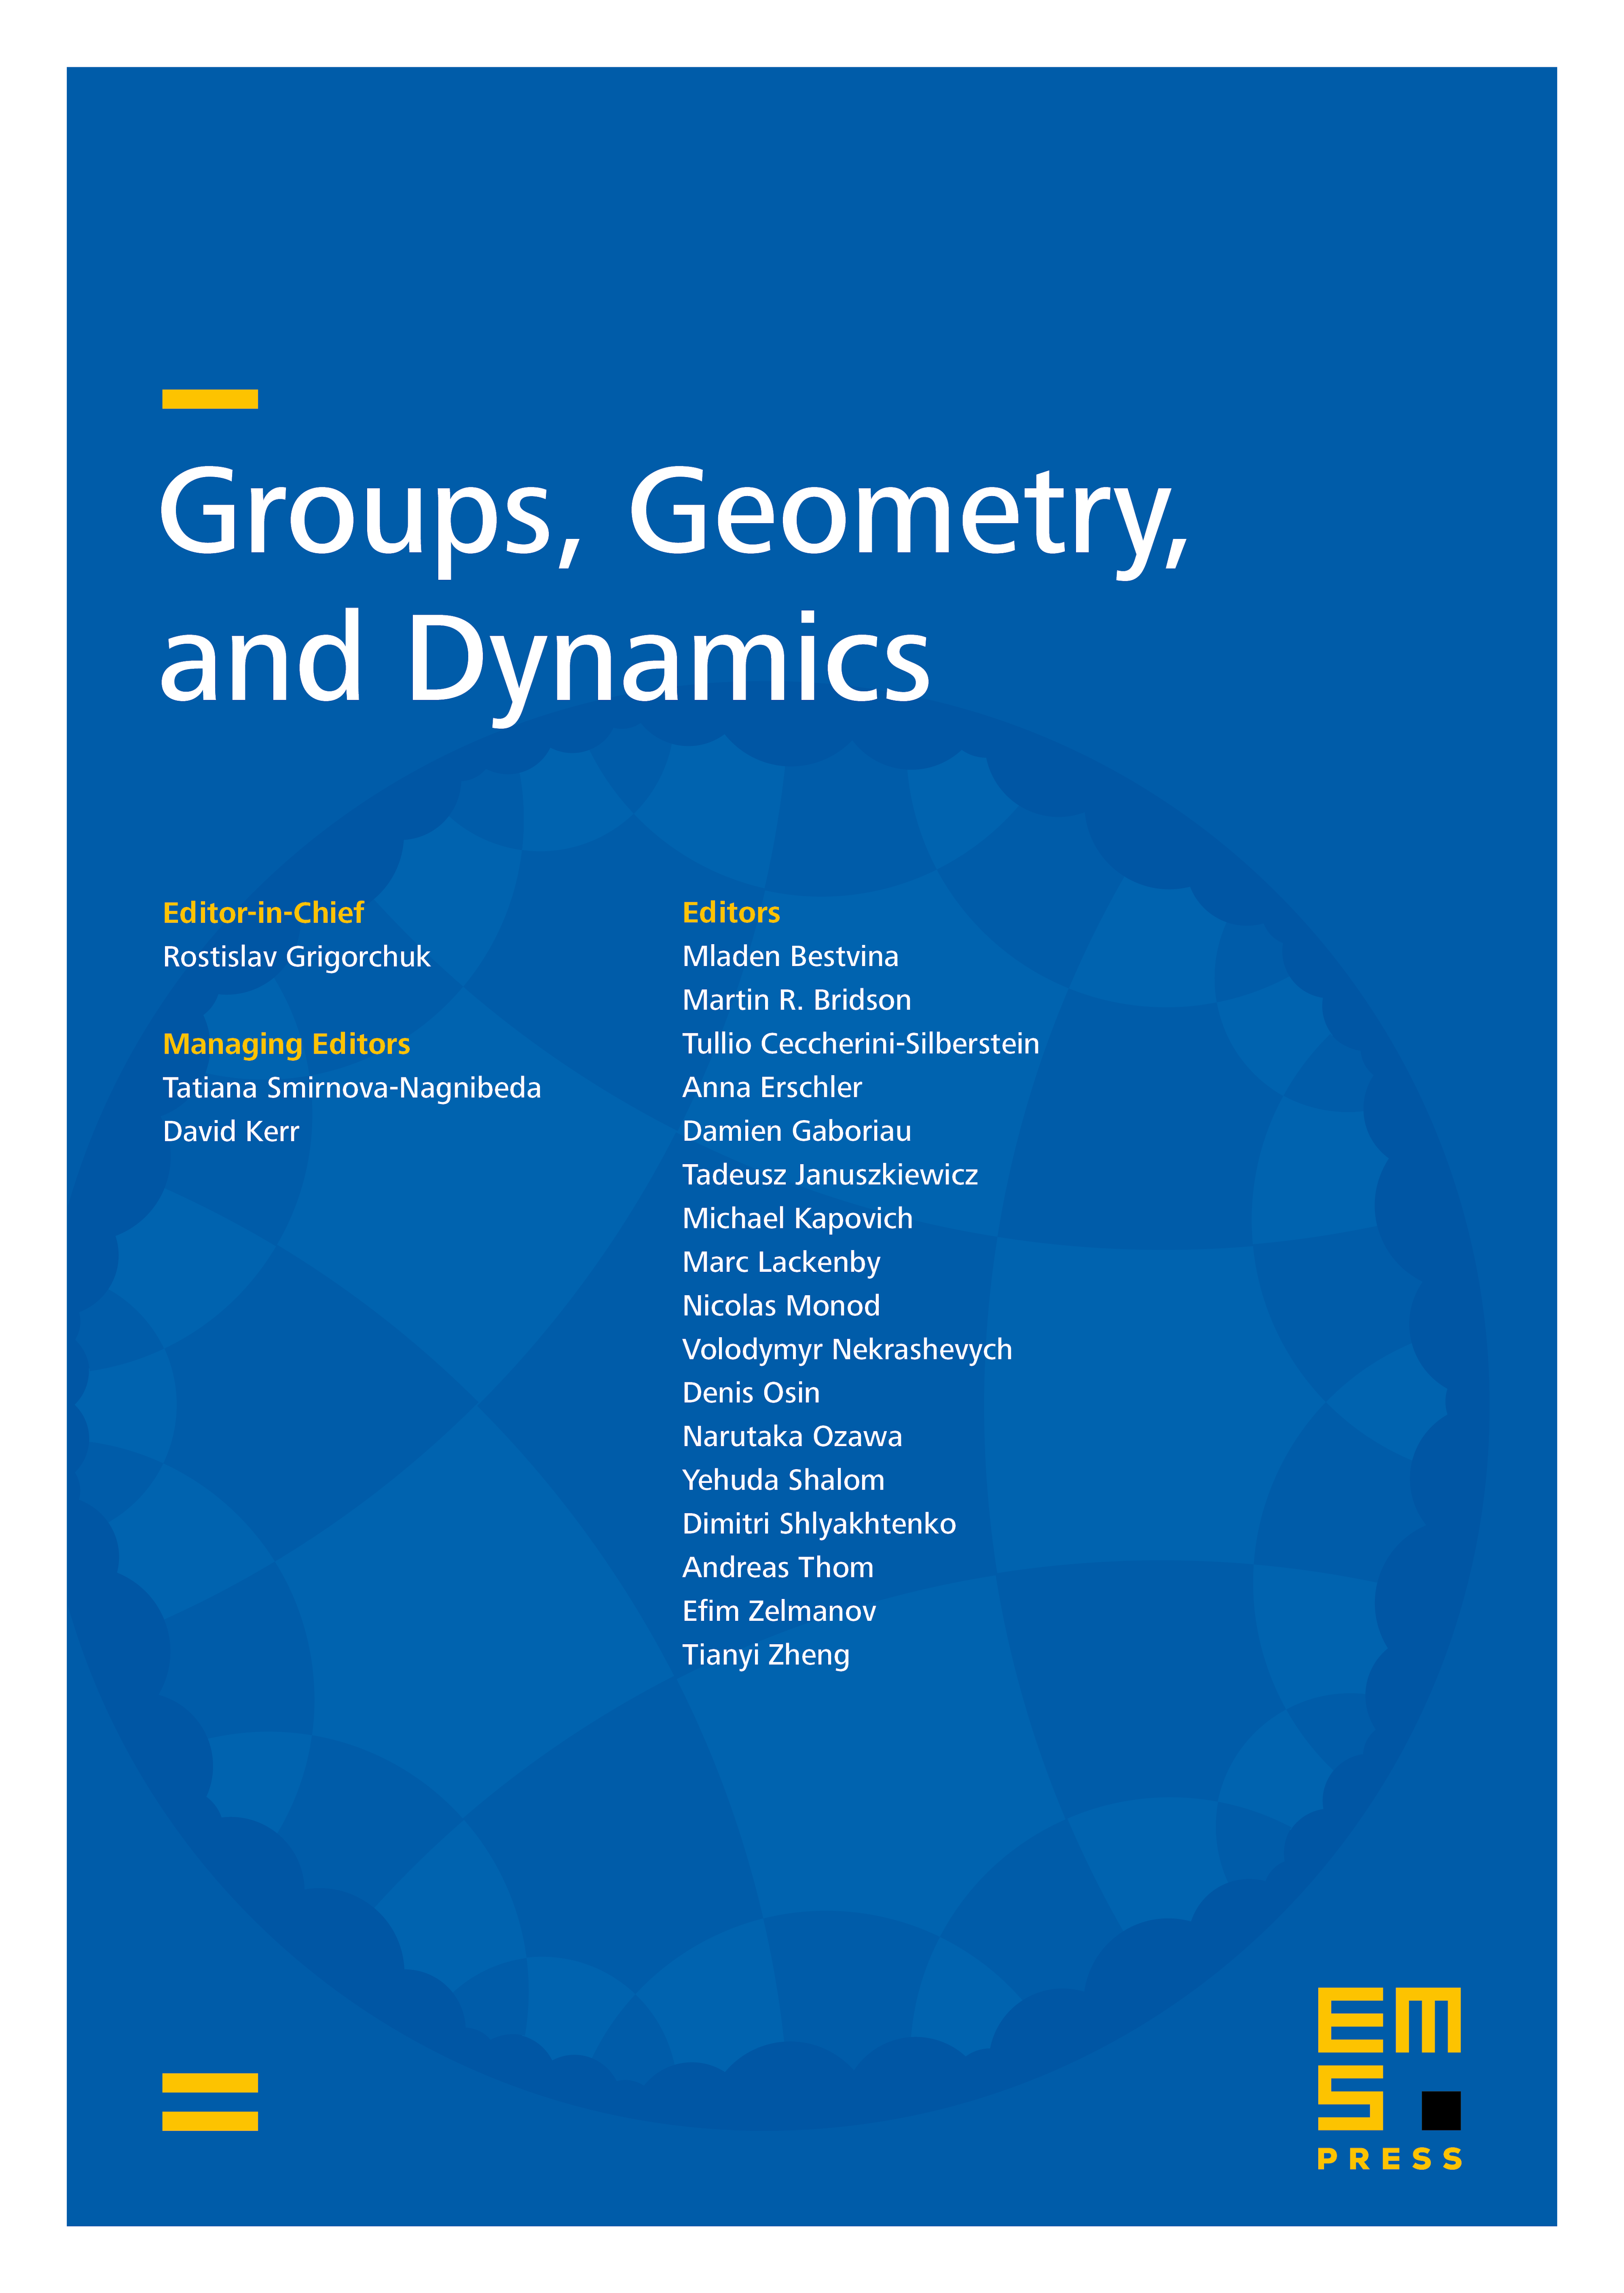 Words of Engel type are concise in residually finite groups. Part II cover